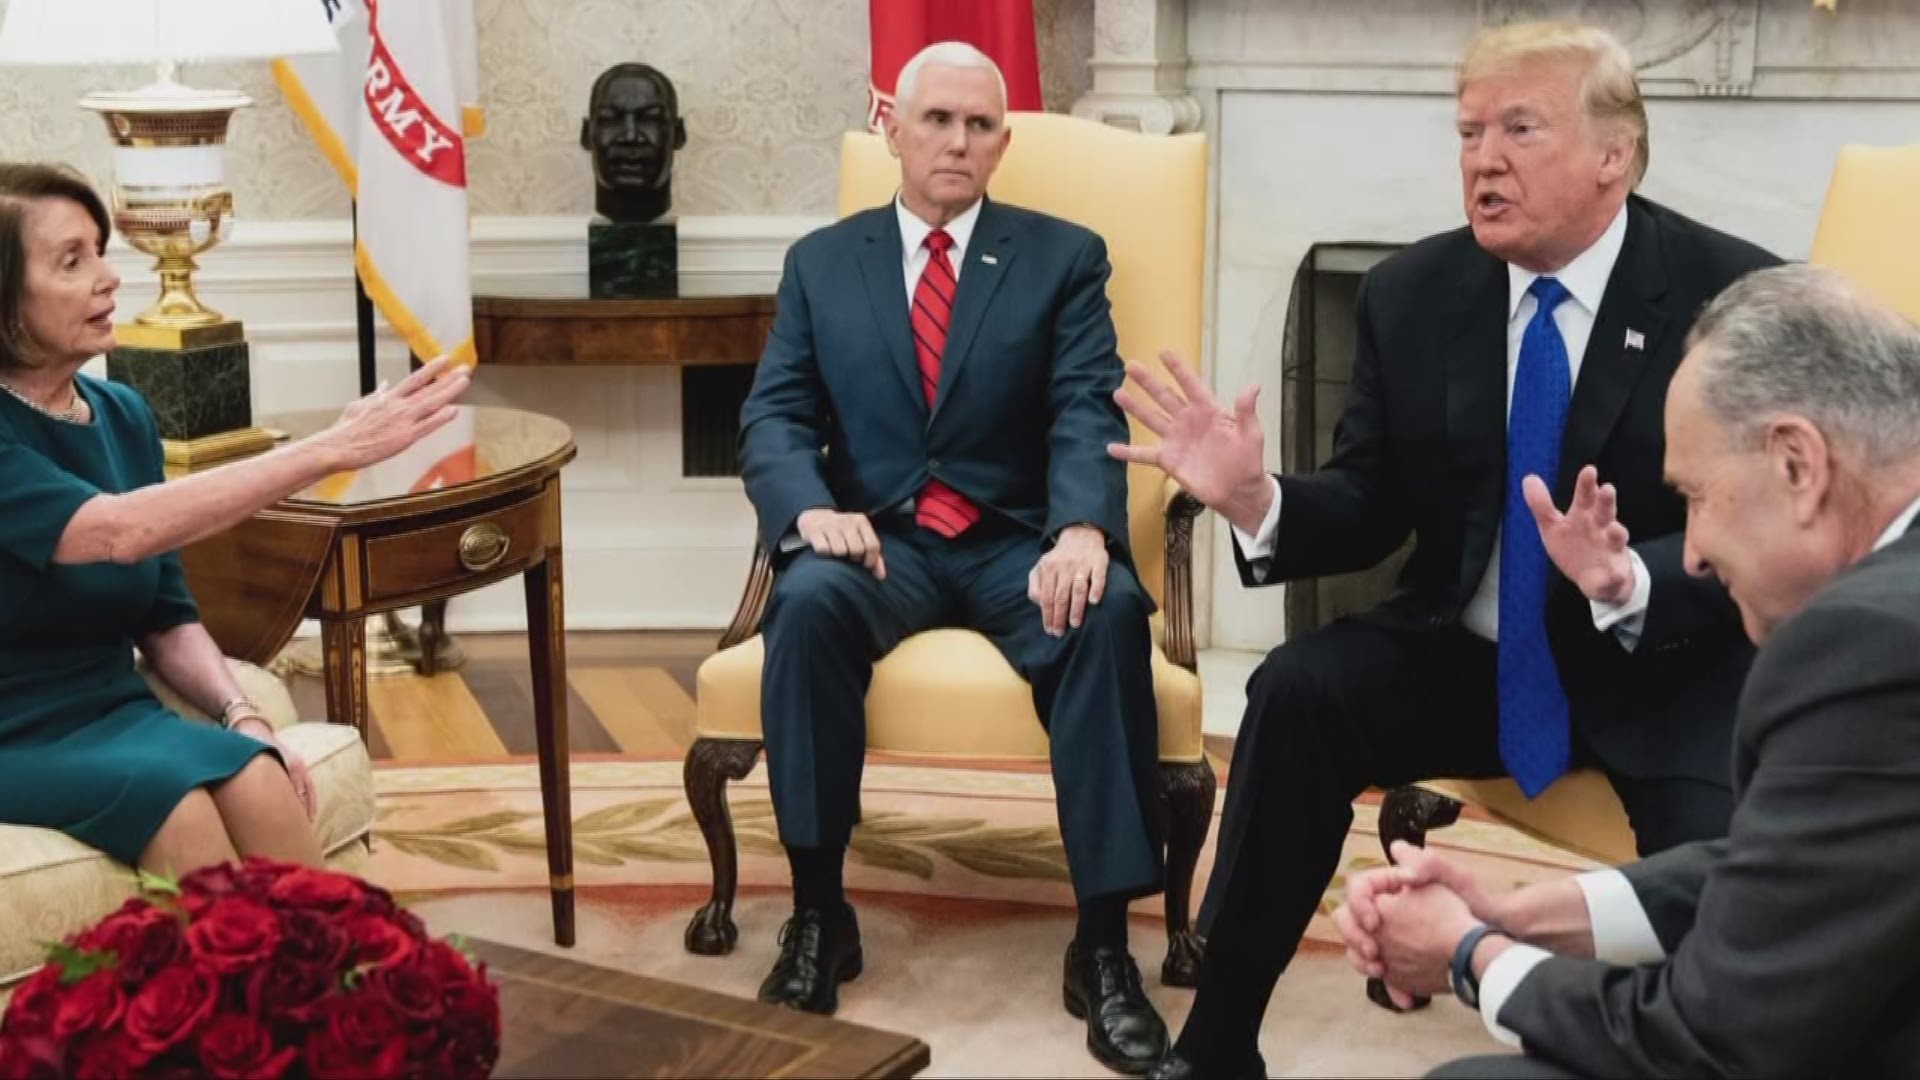 In a wild Oval Office confrontation, President Donald Trump heatedly threatened to shut down the U.S. government Tuesday as he and Democratic leaders bickered over funding for his promised border wall and offered a grim preview of life in Washington the n